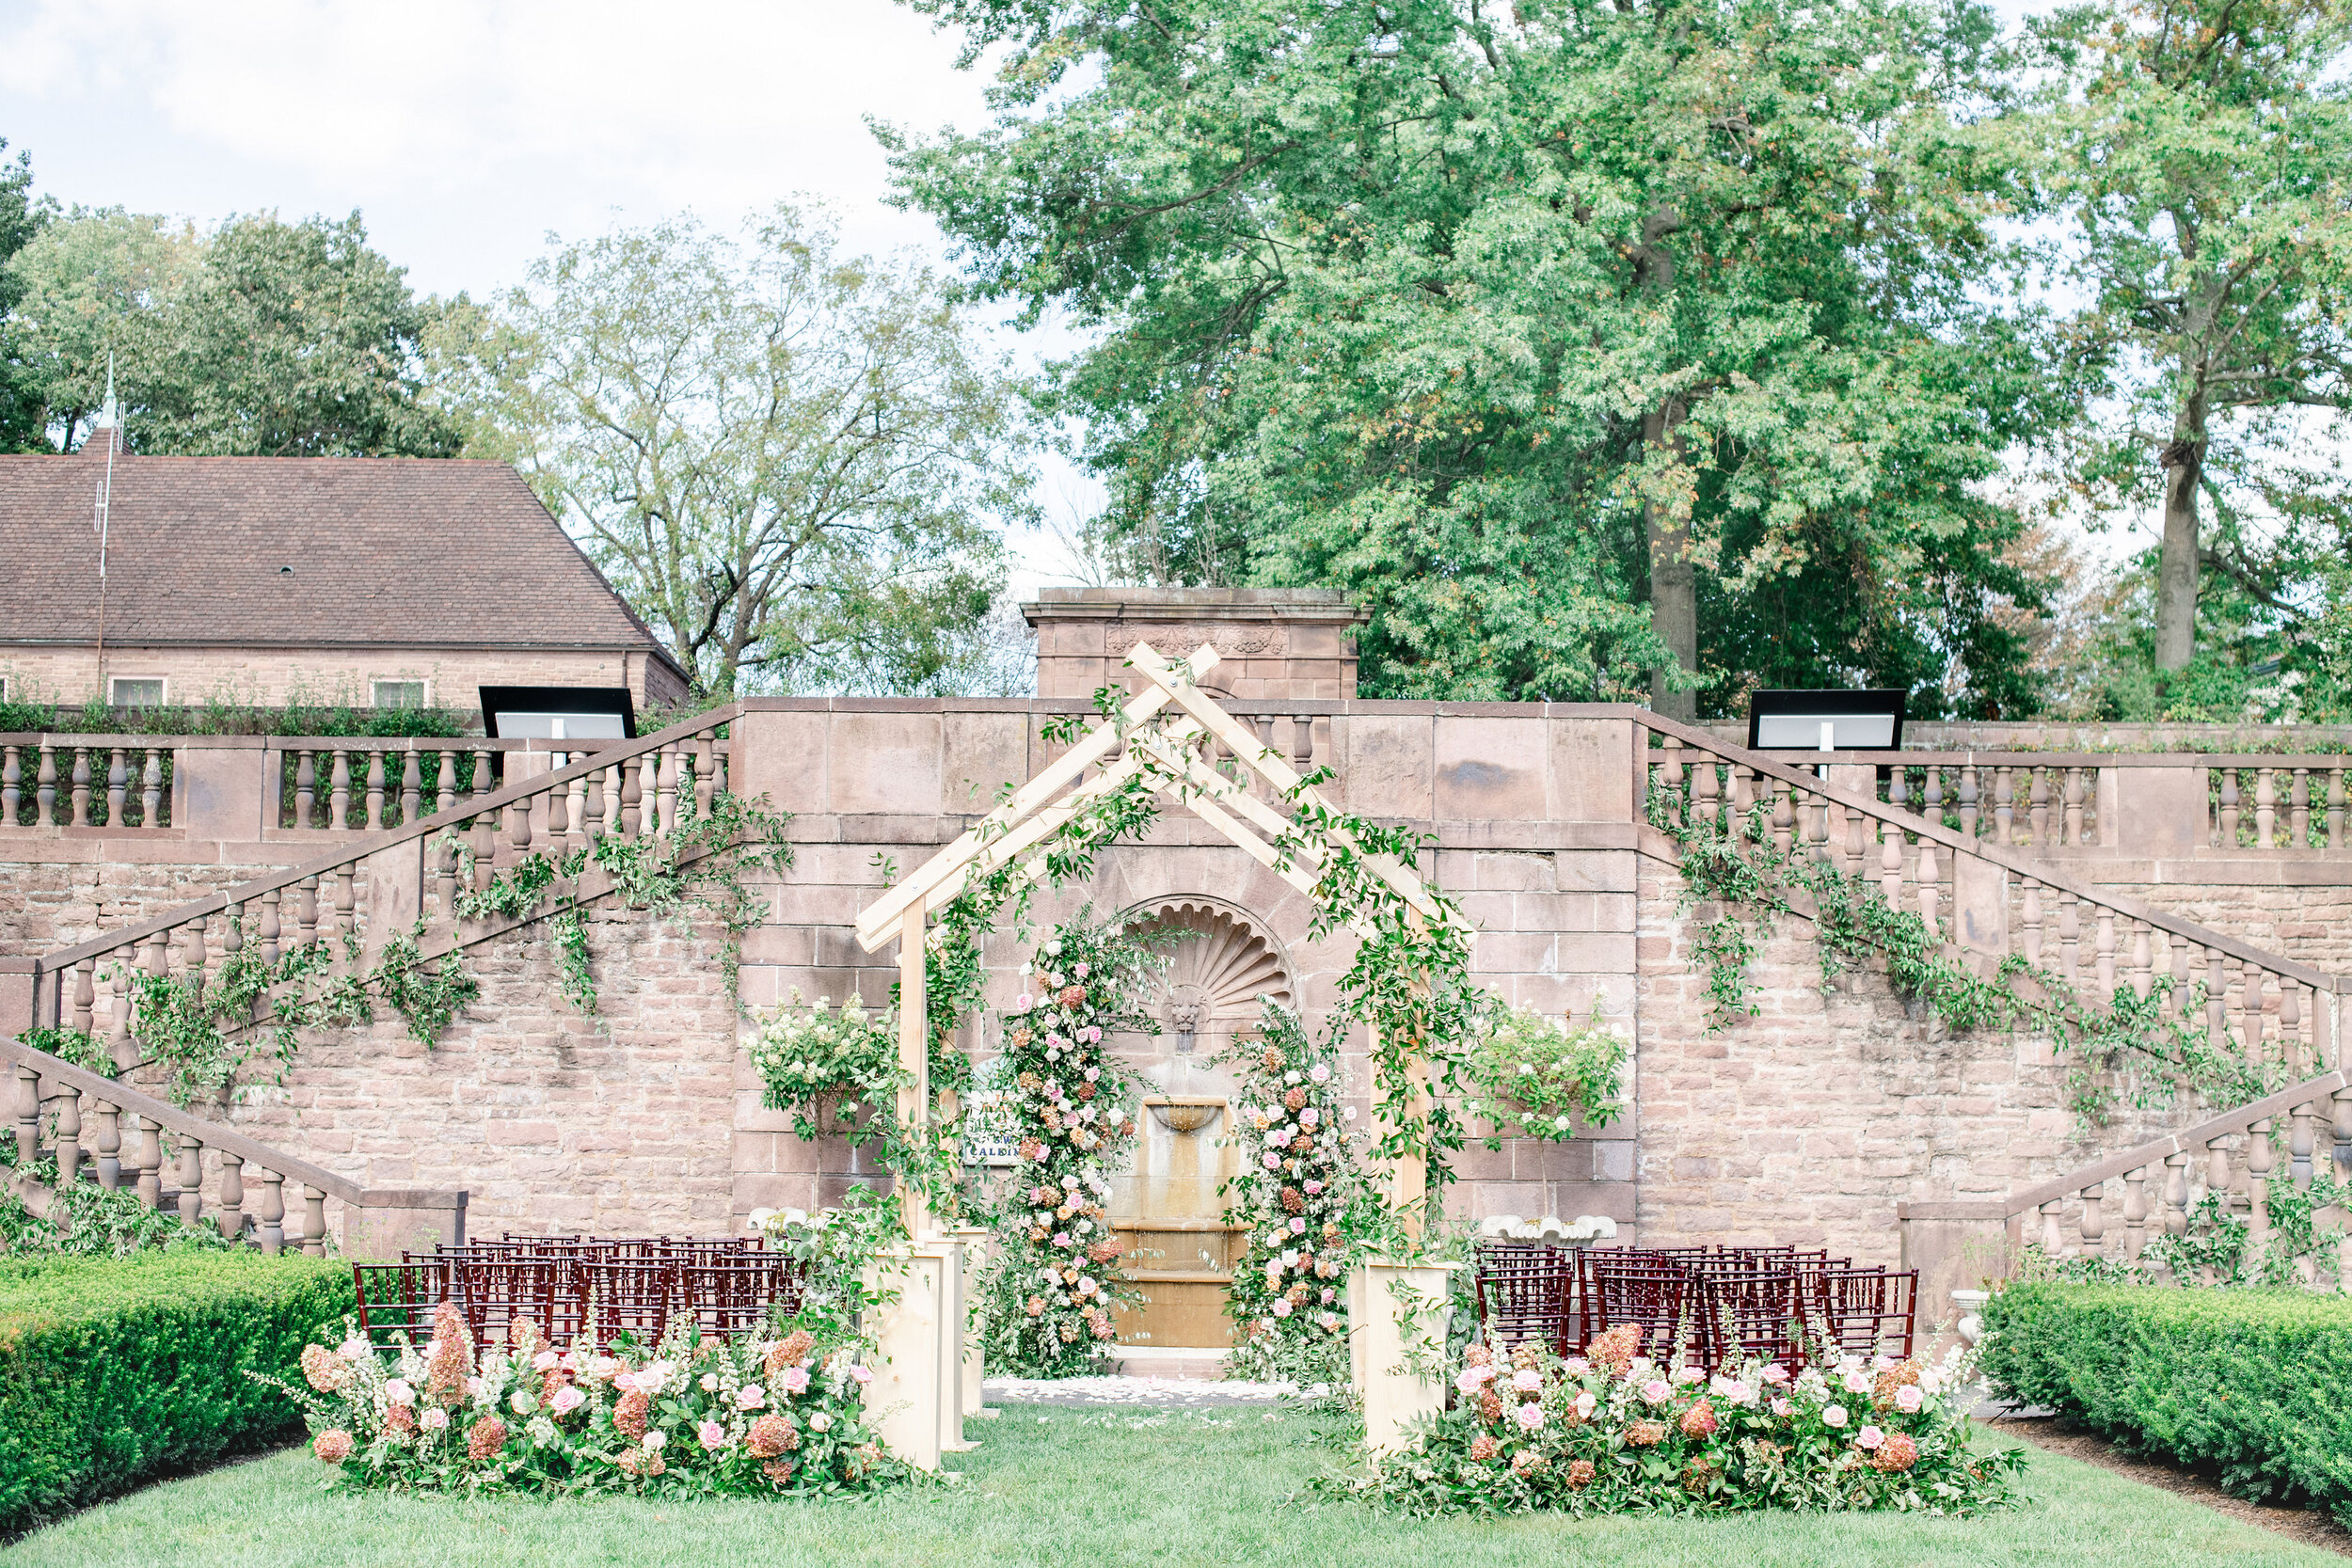 The gorgeous Tyler Gardens in Newtown, PA is the perfect location for a dreamlike late summer wedding. Ruffled Blog and Copper and Chloe's Romantic garden vision came to life when dressed with the amazing florals by Belovely Design. It was as though…